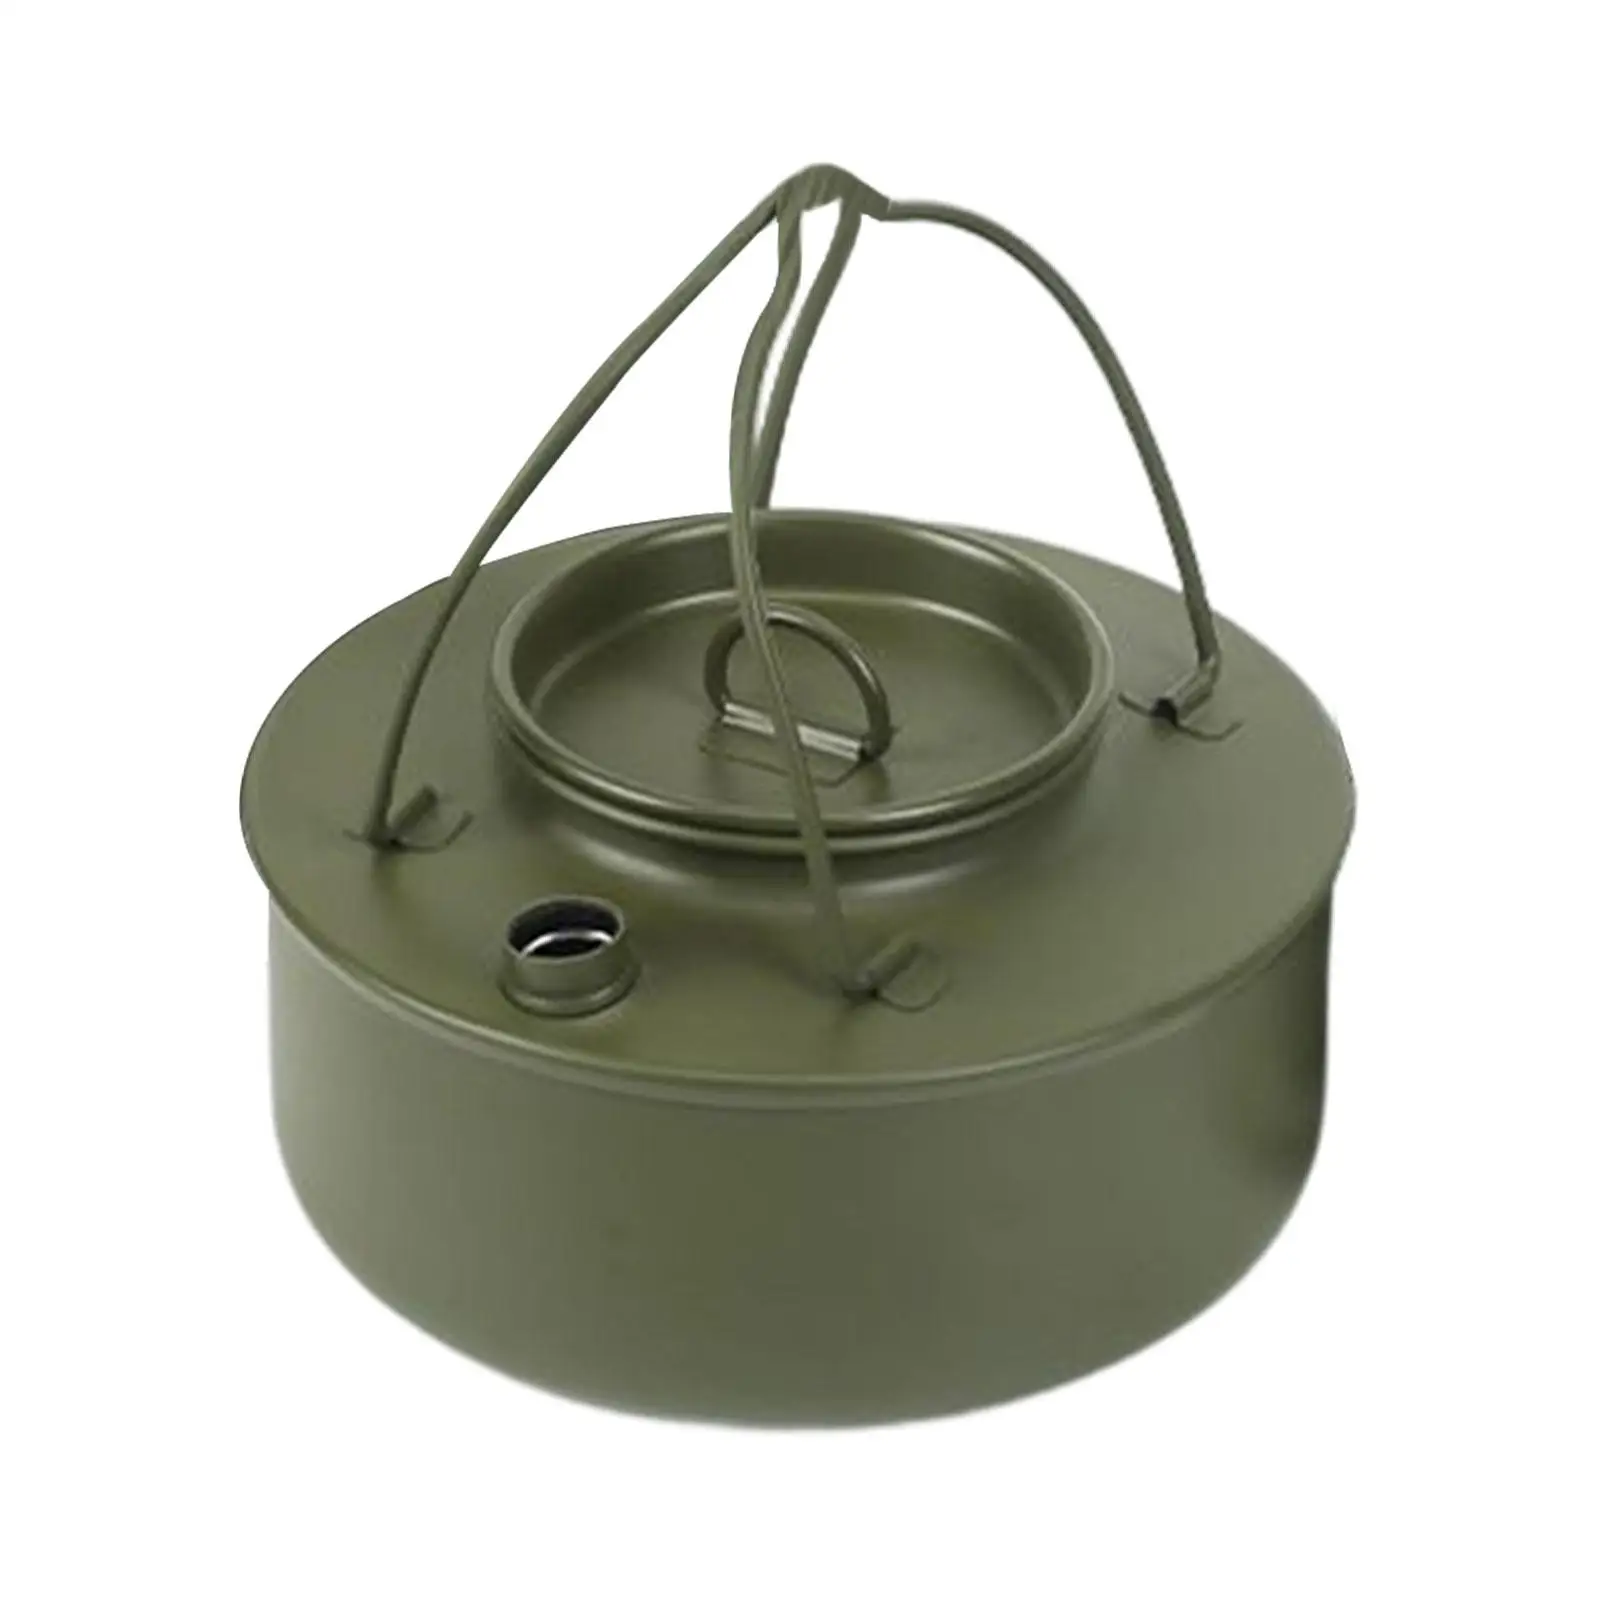 Camping Kettle Teapot with Silicone Handle Outdoor Kettle for Camping Travel